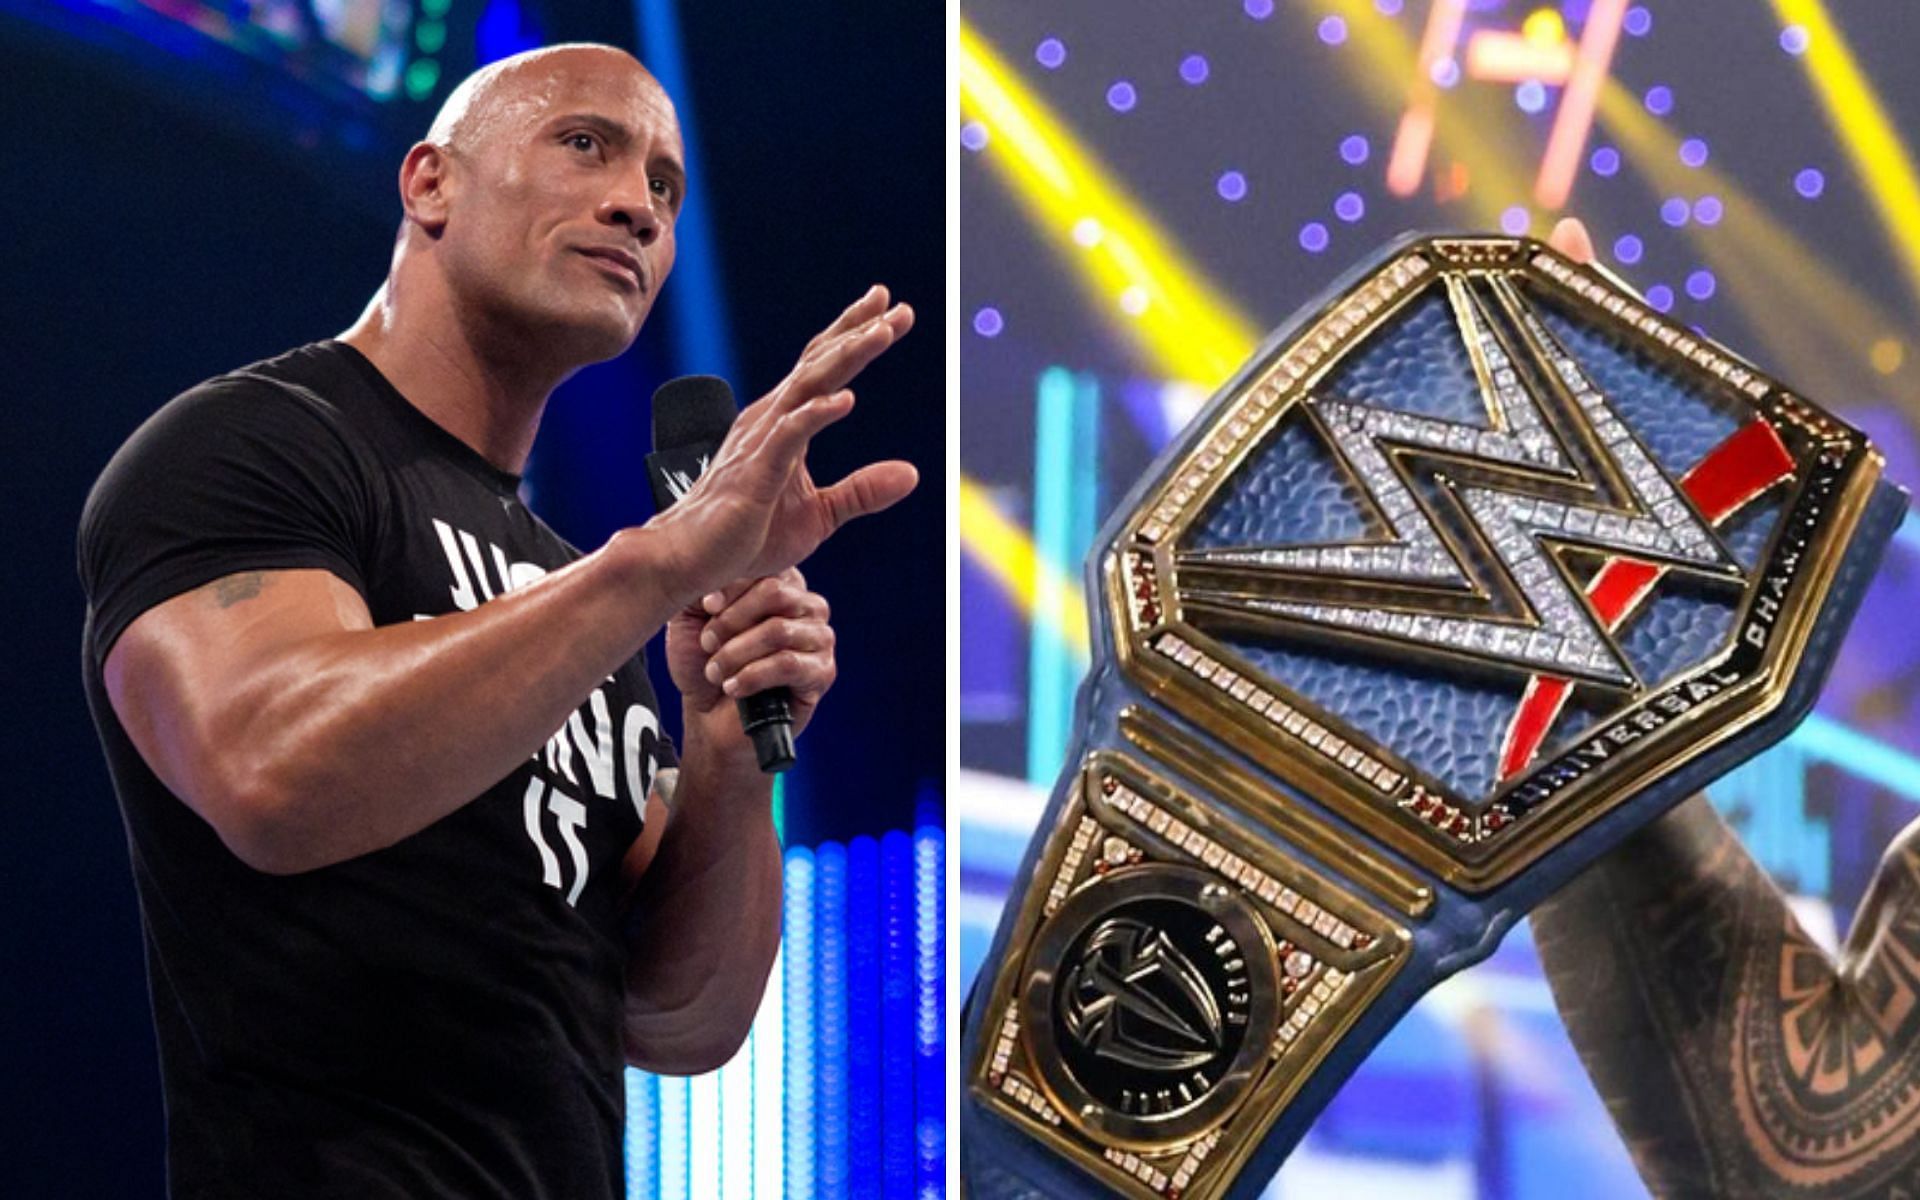 The Rock is a multi-time World Champion!